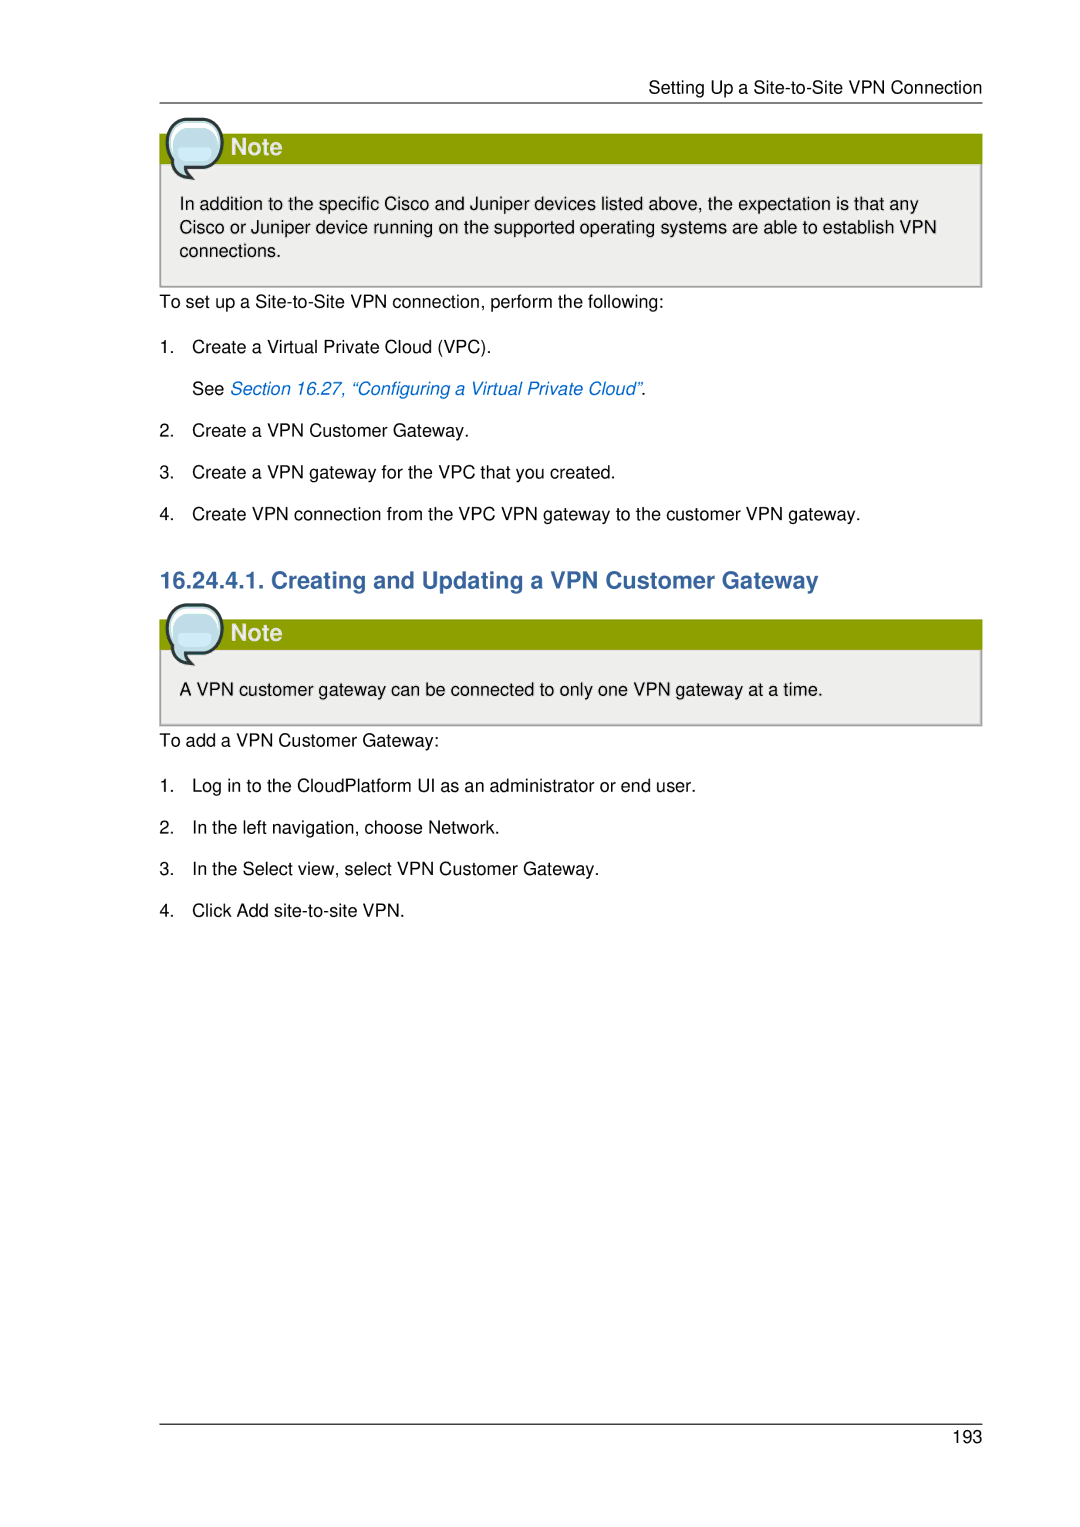 Citrix Systems 4.2 manual Creating and Updating a VPN Customer Gateway Note, See .27, Configuring a Virtual Private Cloud 